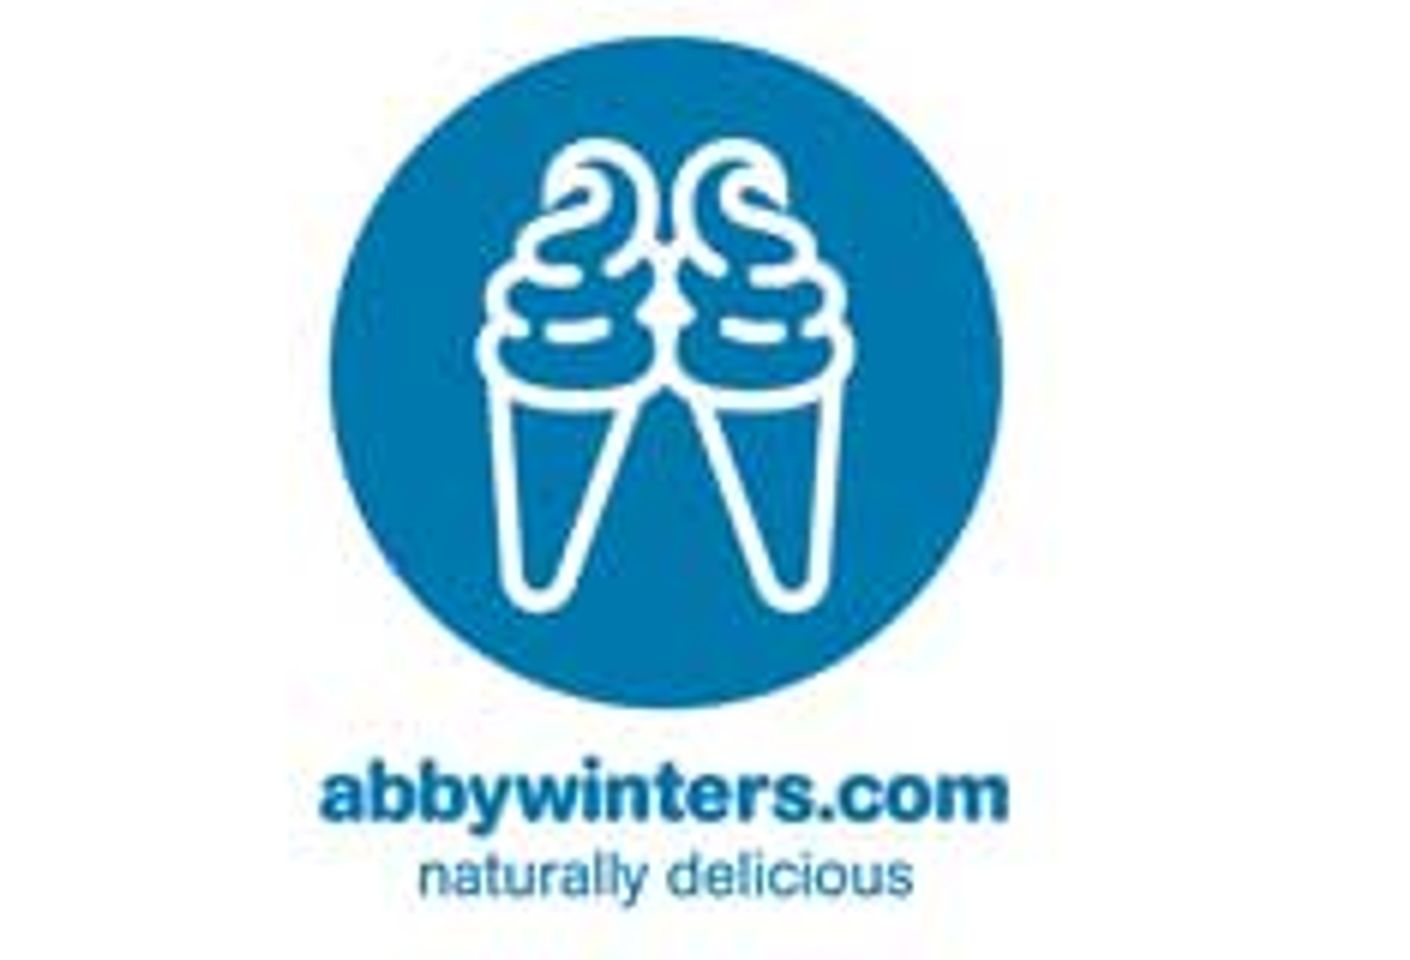 New Flavors Increase Retention at AbbyWinters.com